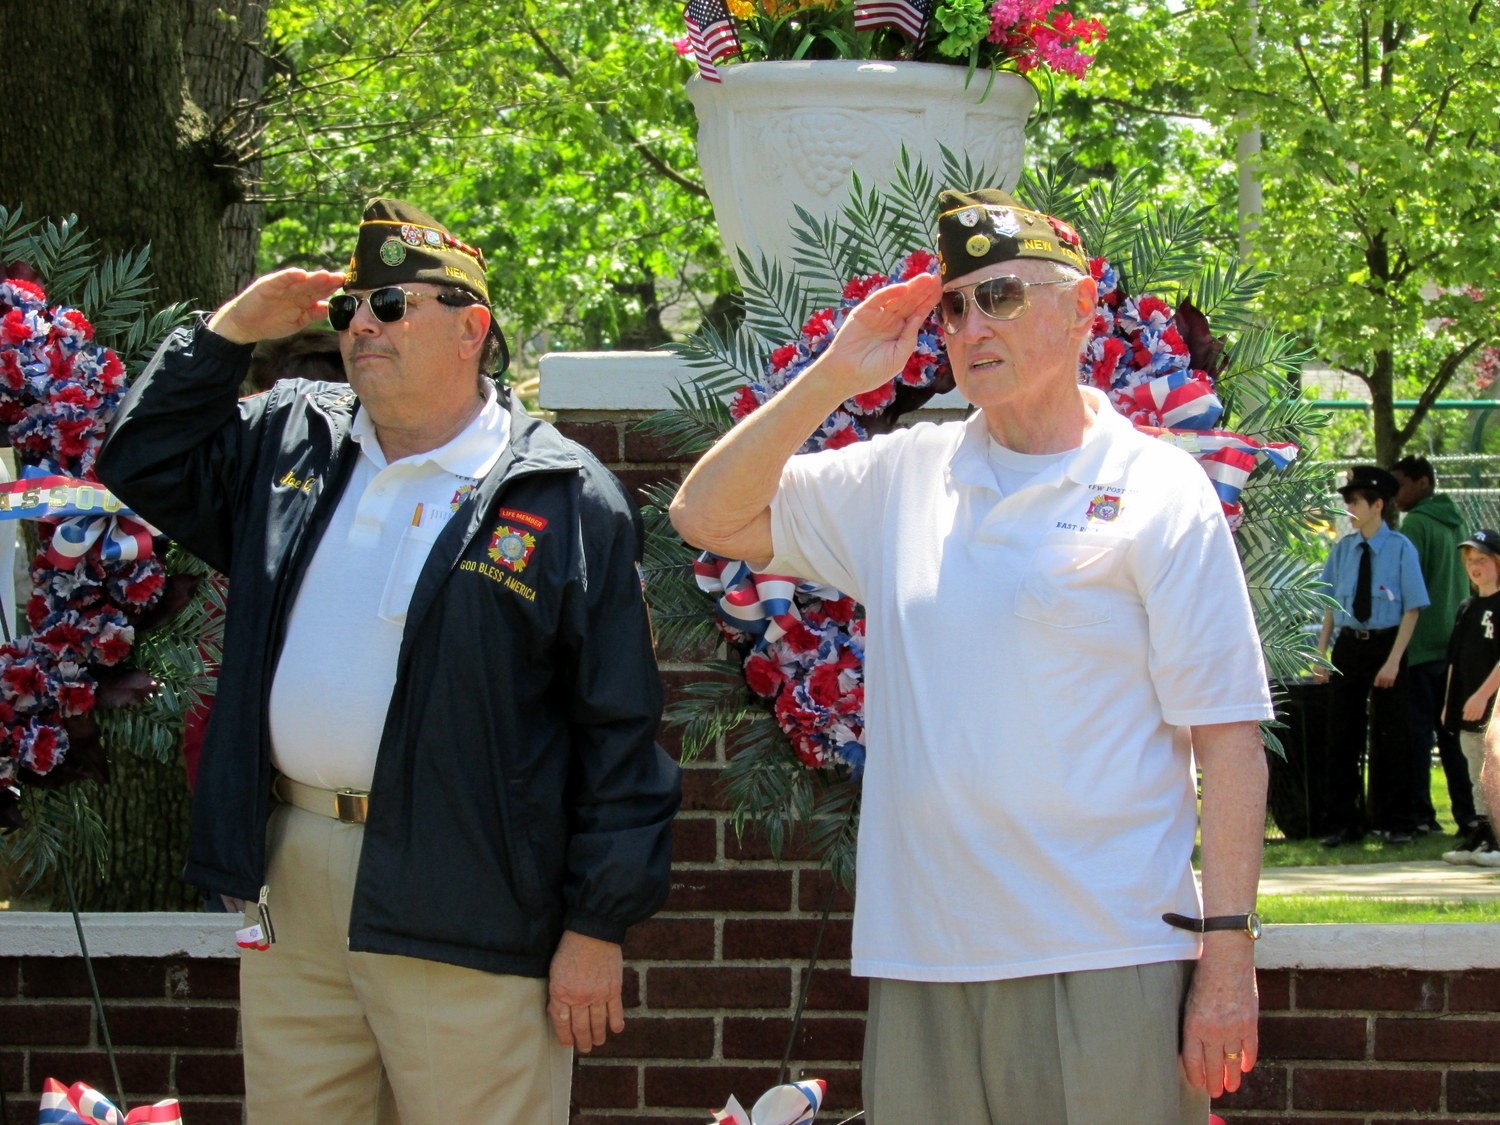 Many Memorial Day parades will be held on Mon., May 25.